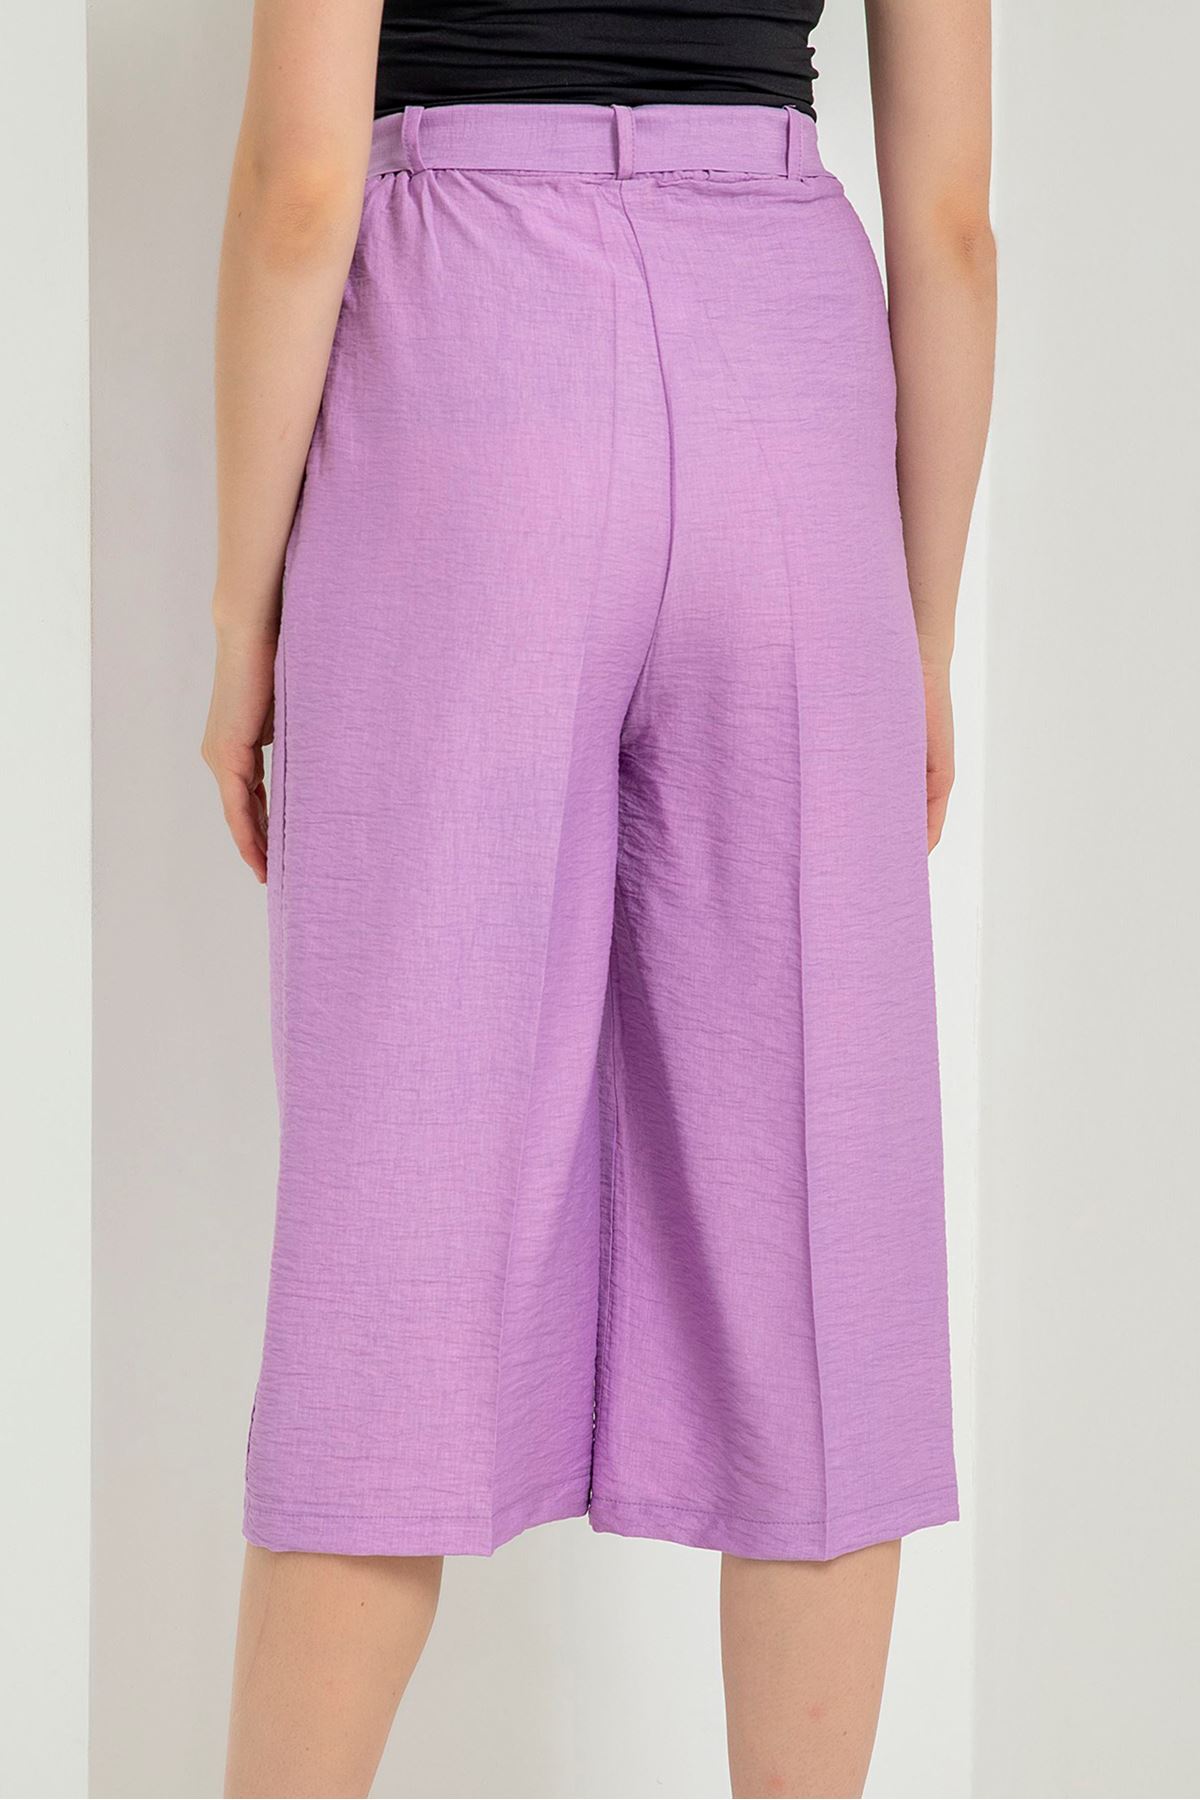 Linen Fabric 3/4 Short Comfy Fit Belted Women'S Trouser - Lilac